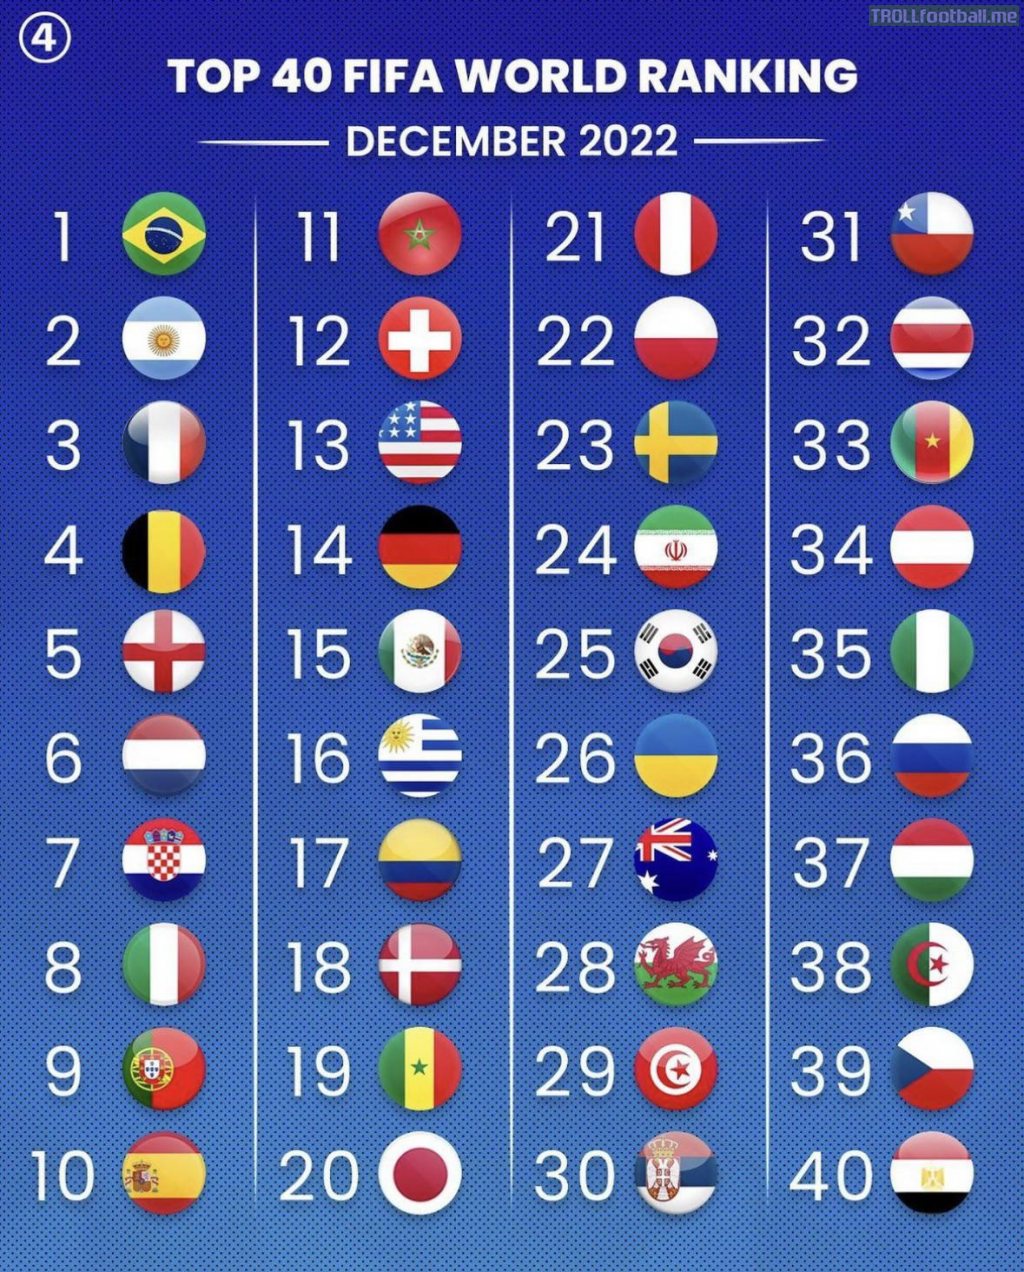 Updated ranking of FIFA top 40 countries